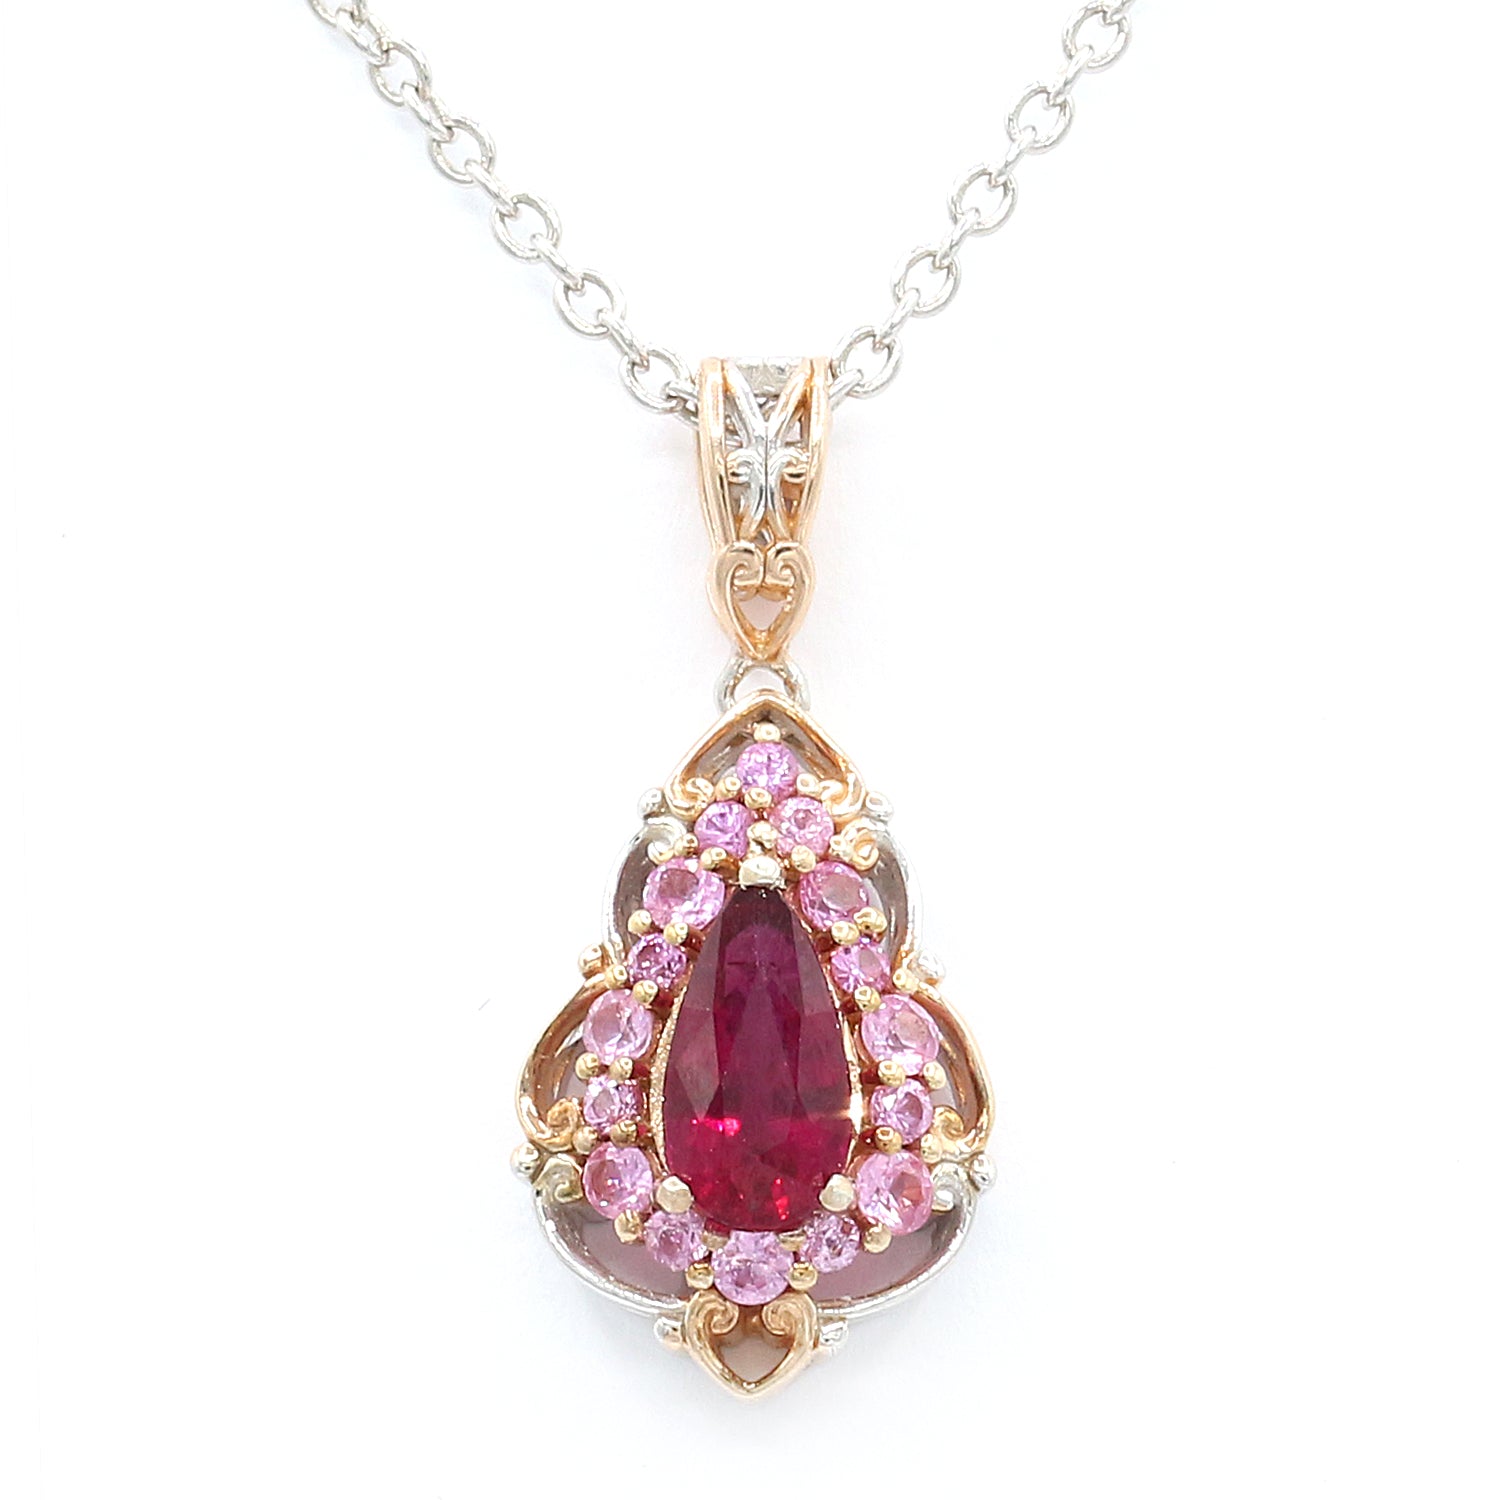 Limited Edition Gems en Vogue One-of-a-Kind 1.43ctw Rubellite & Pink Sapphire Pendant